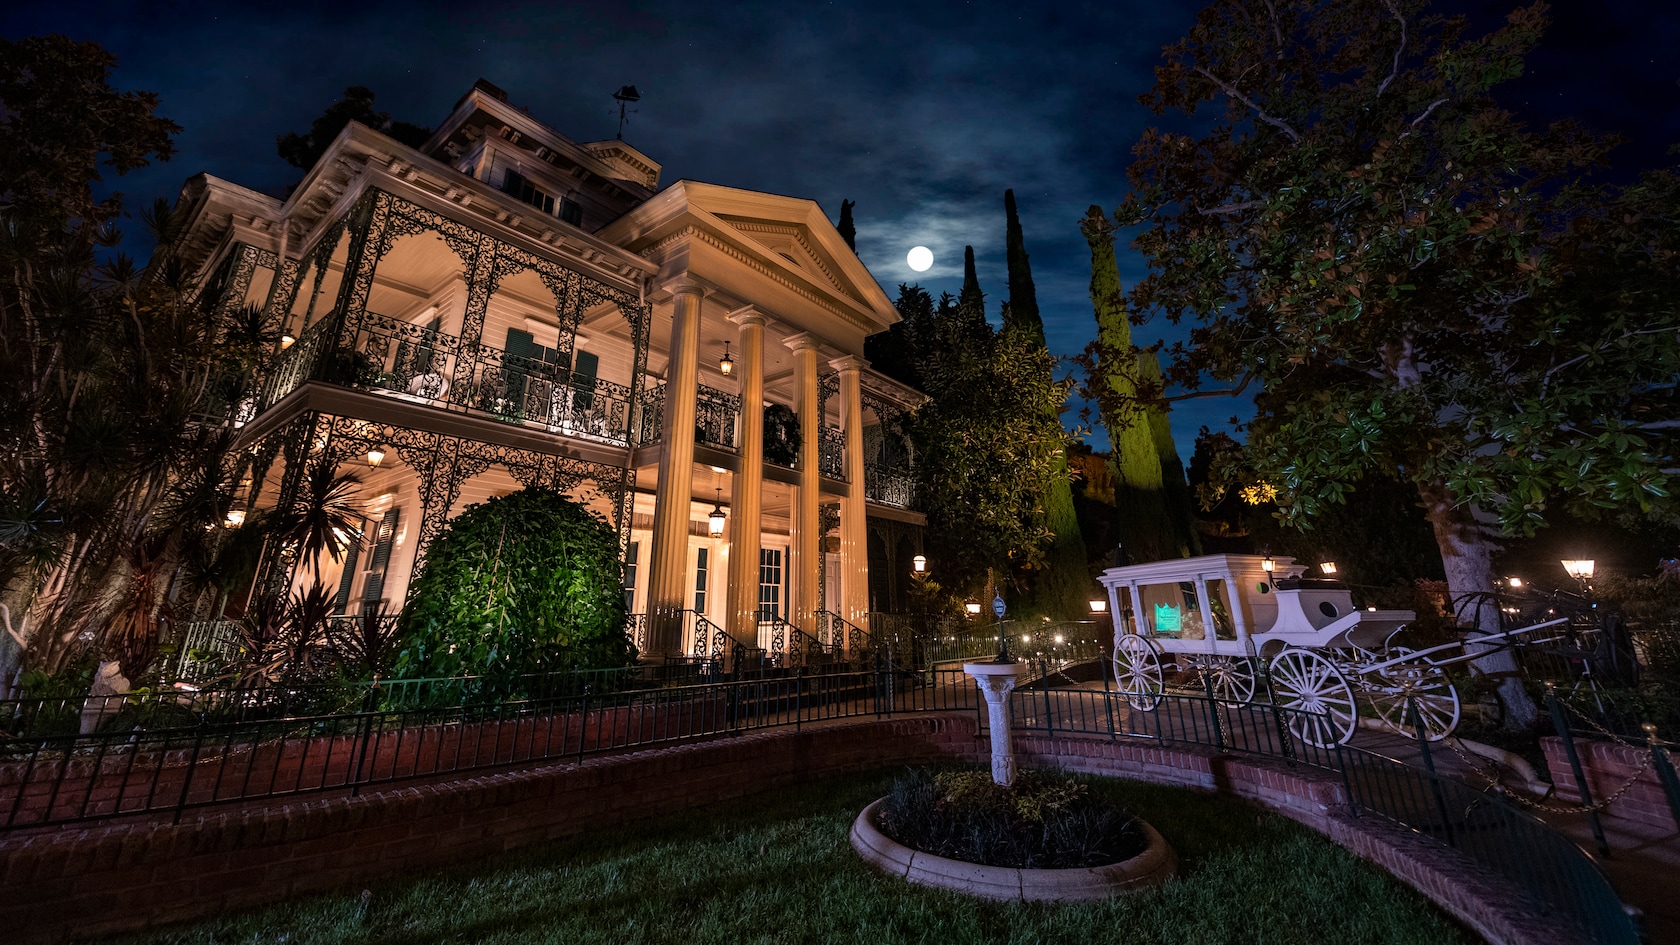 Does the Haunted Mansion Update Connect to Pirates of the Caribbean